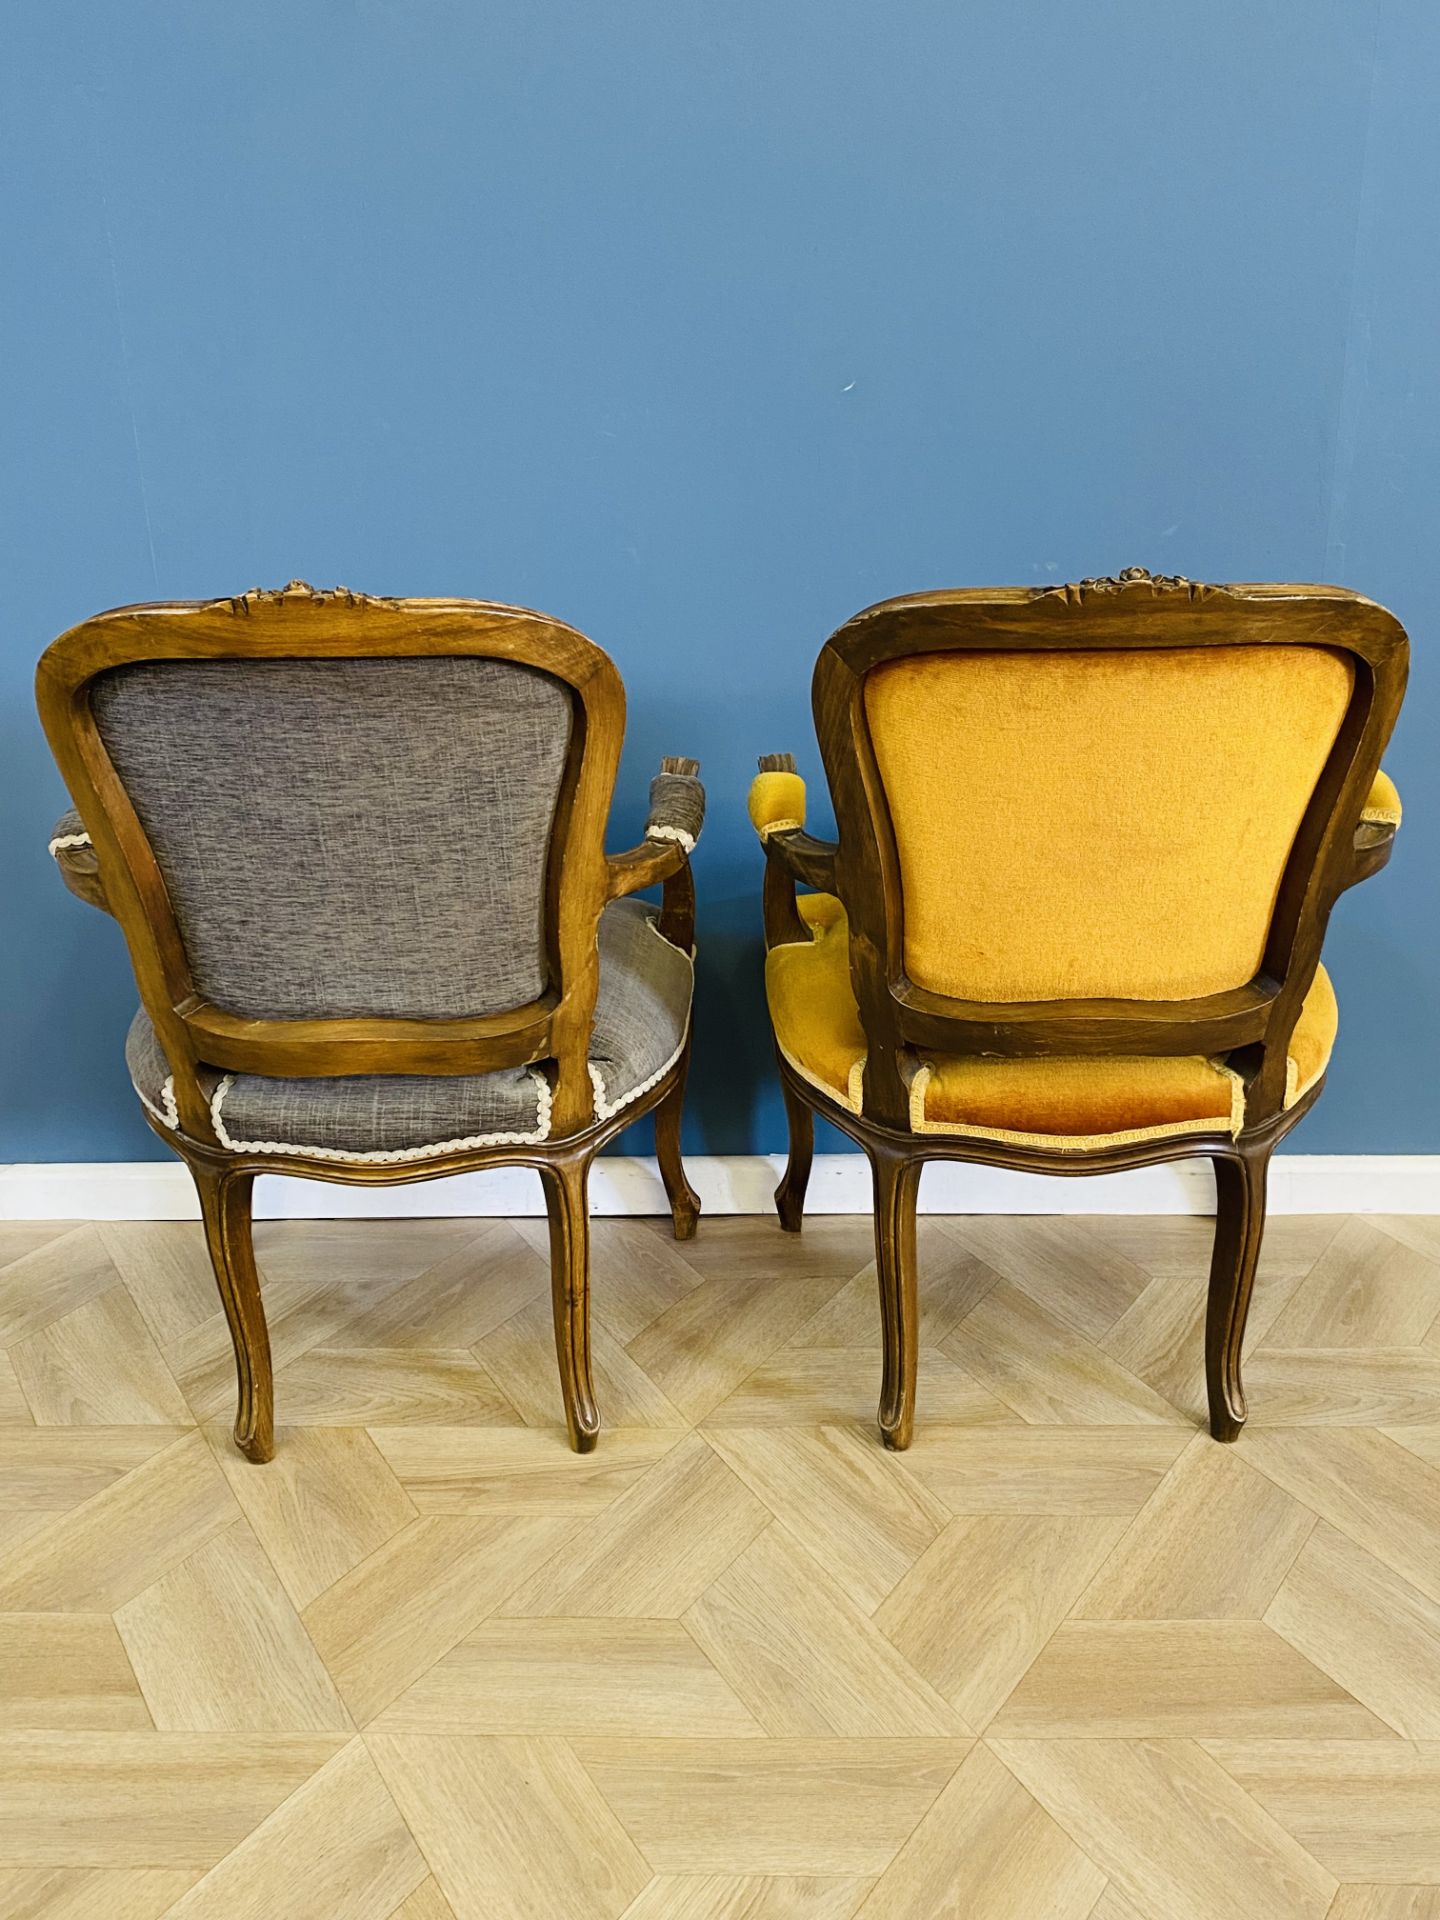 Pair of French style elbow chairs - Image 5 of 8